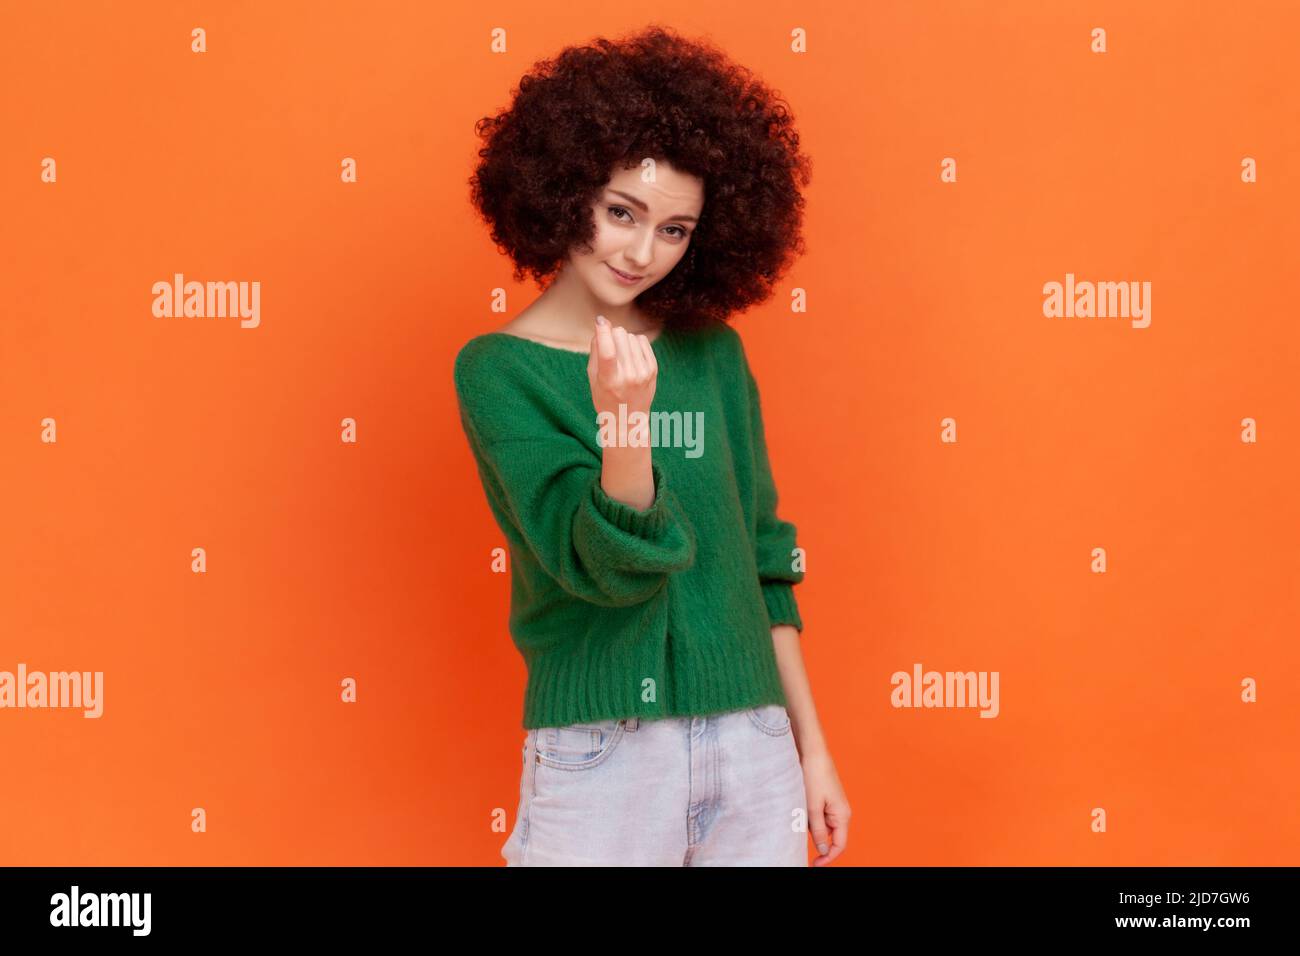 Come here. Woman with Afro hairstyle wearing green casual style sweater making beckoning gesture, inviting to come, flirting and looking playful. Indoor studio shot isolated on orange background. Stock Photo